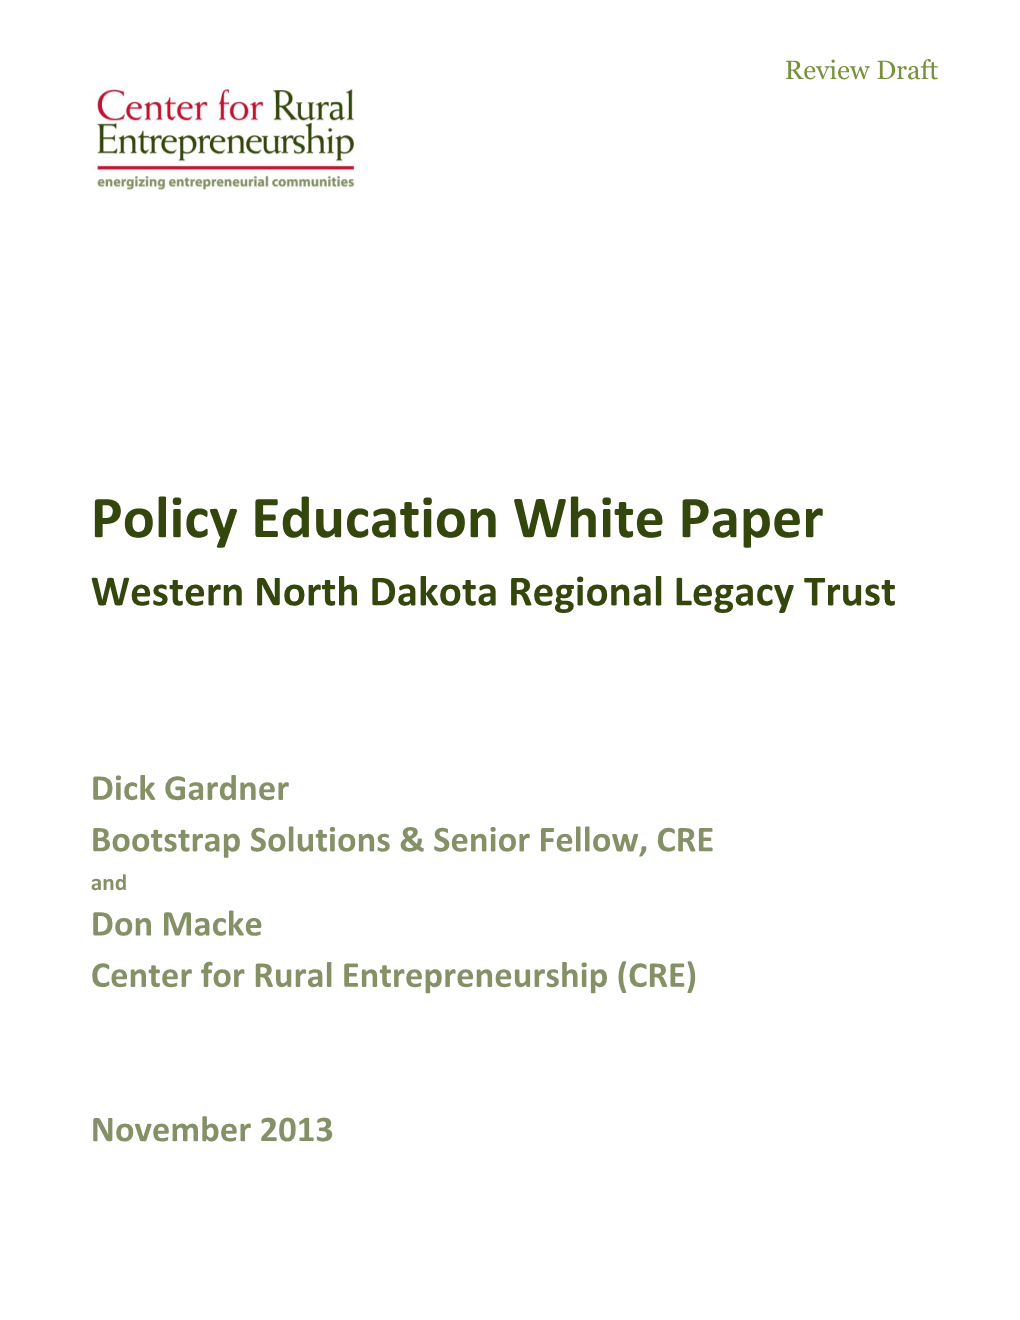 Policy Education White Paper